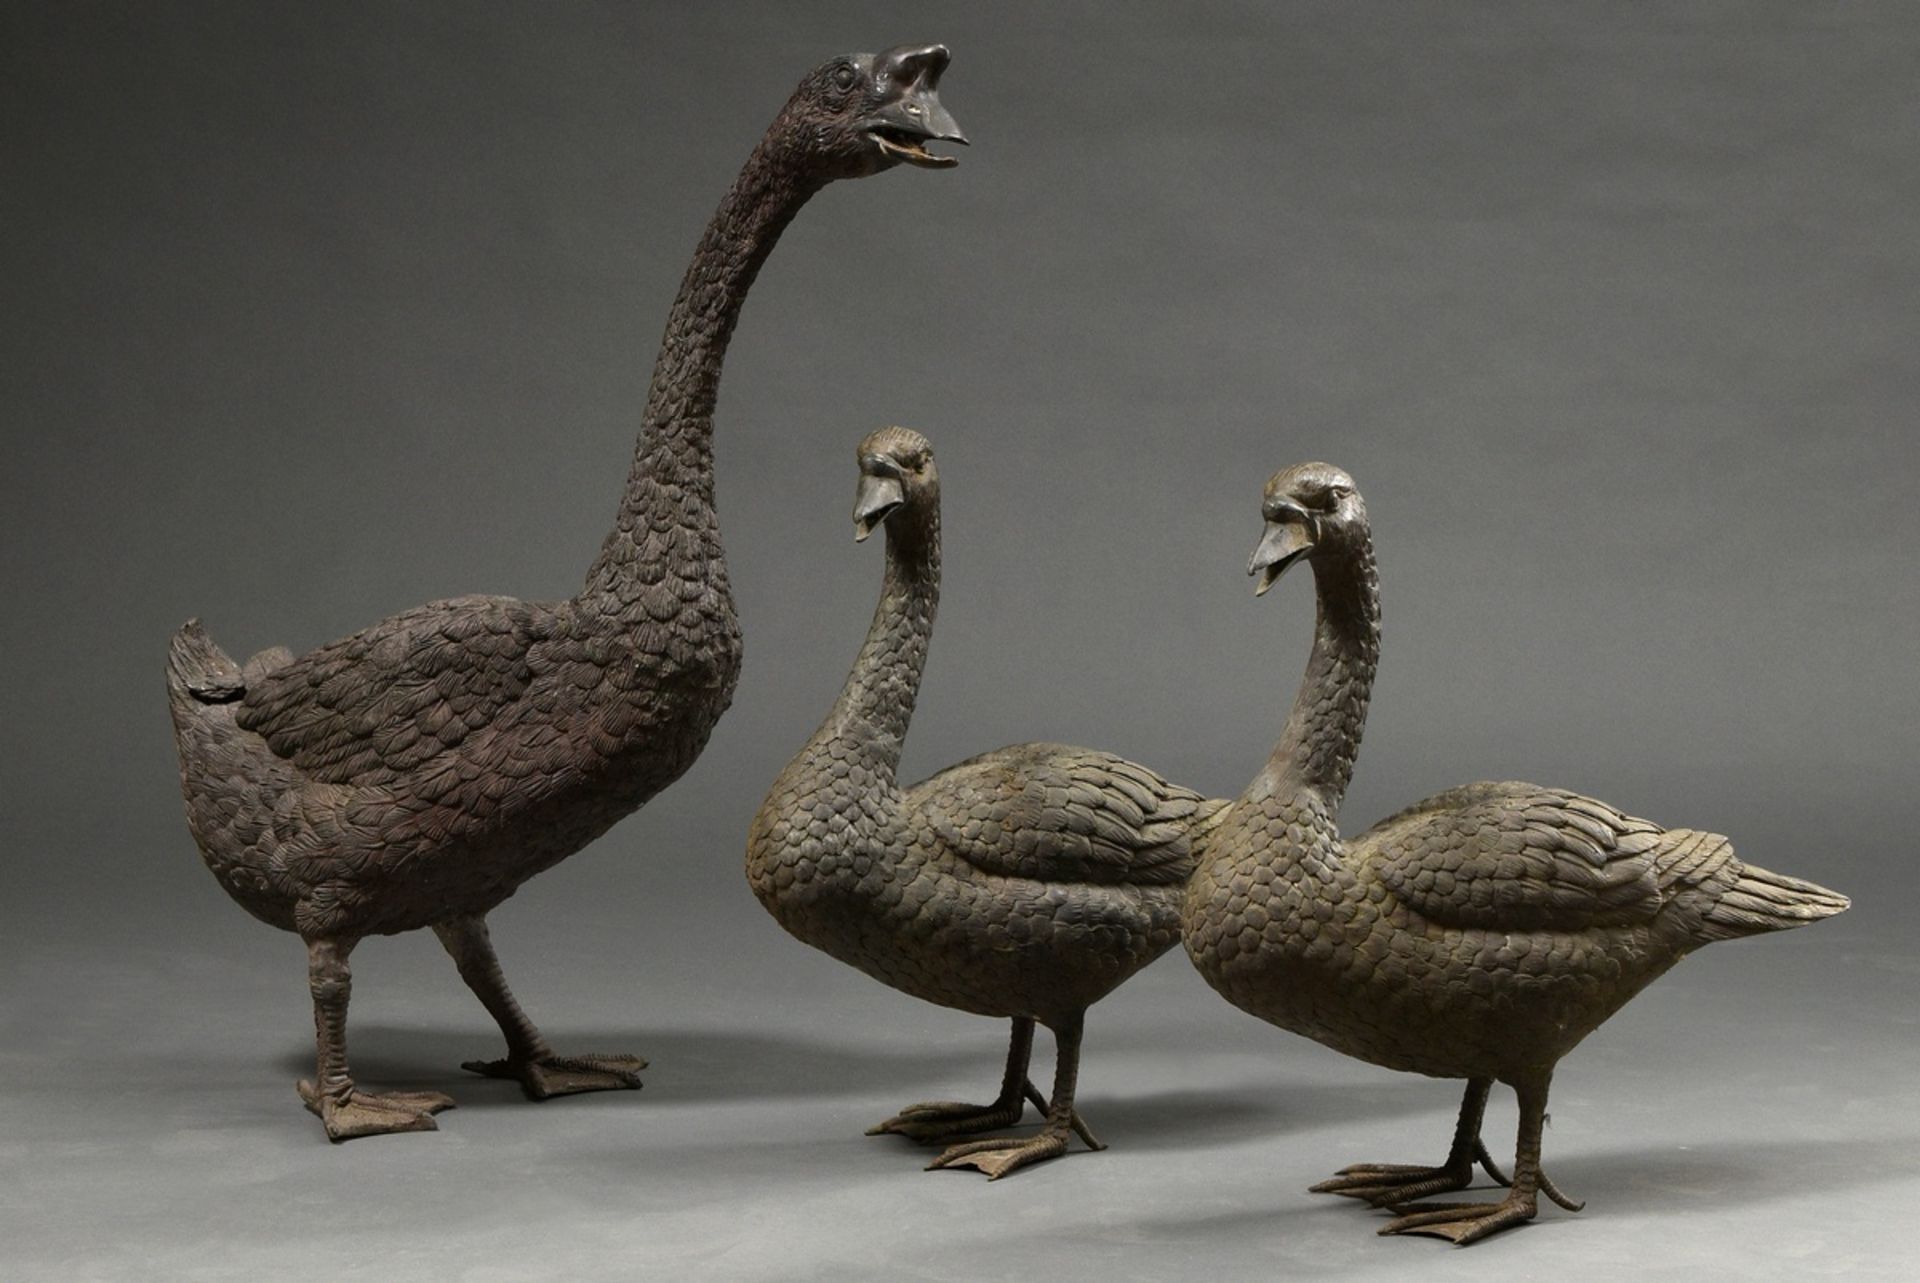 3 Bronze sculptures "Hump-backed swan with 2 young swans", h. 49/51/75cm, signs of age